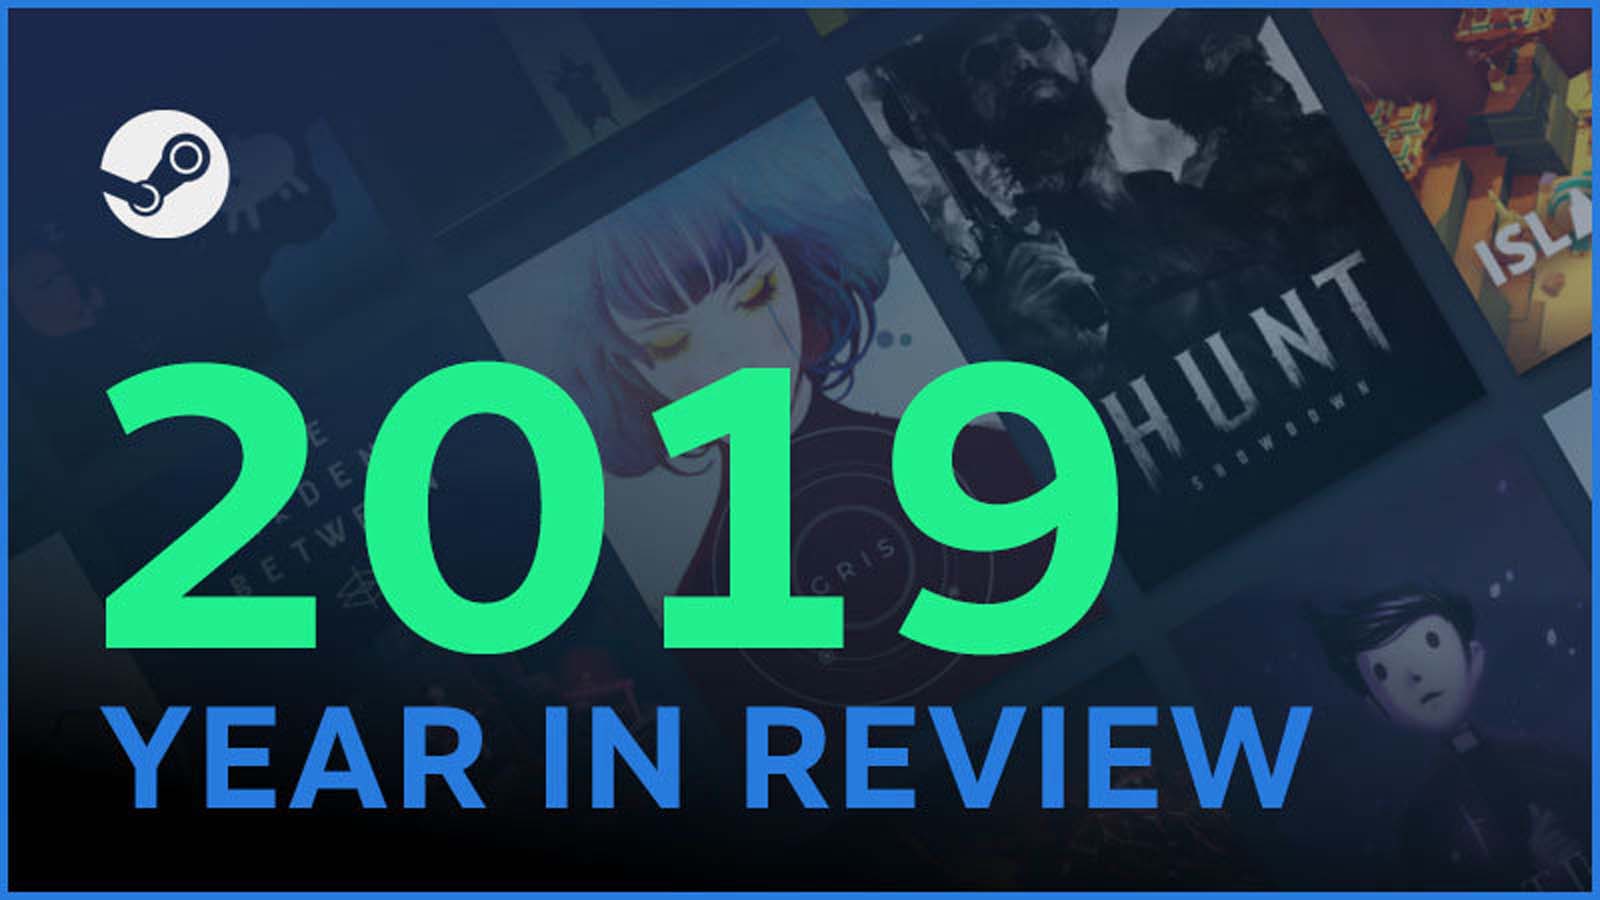 Steam 2019 Year in Review is now online in the Steamworks Developer Group